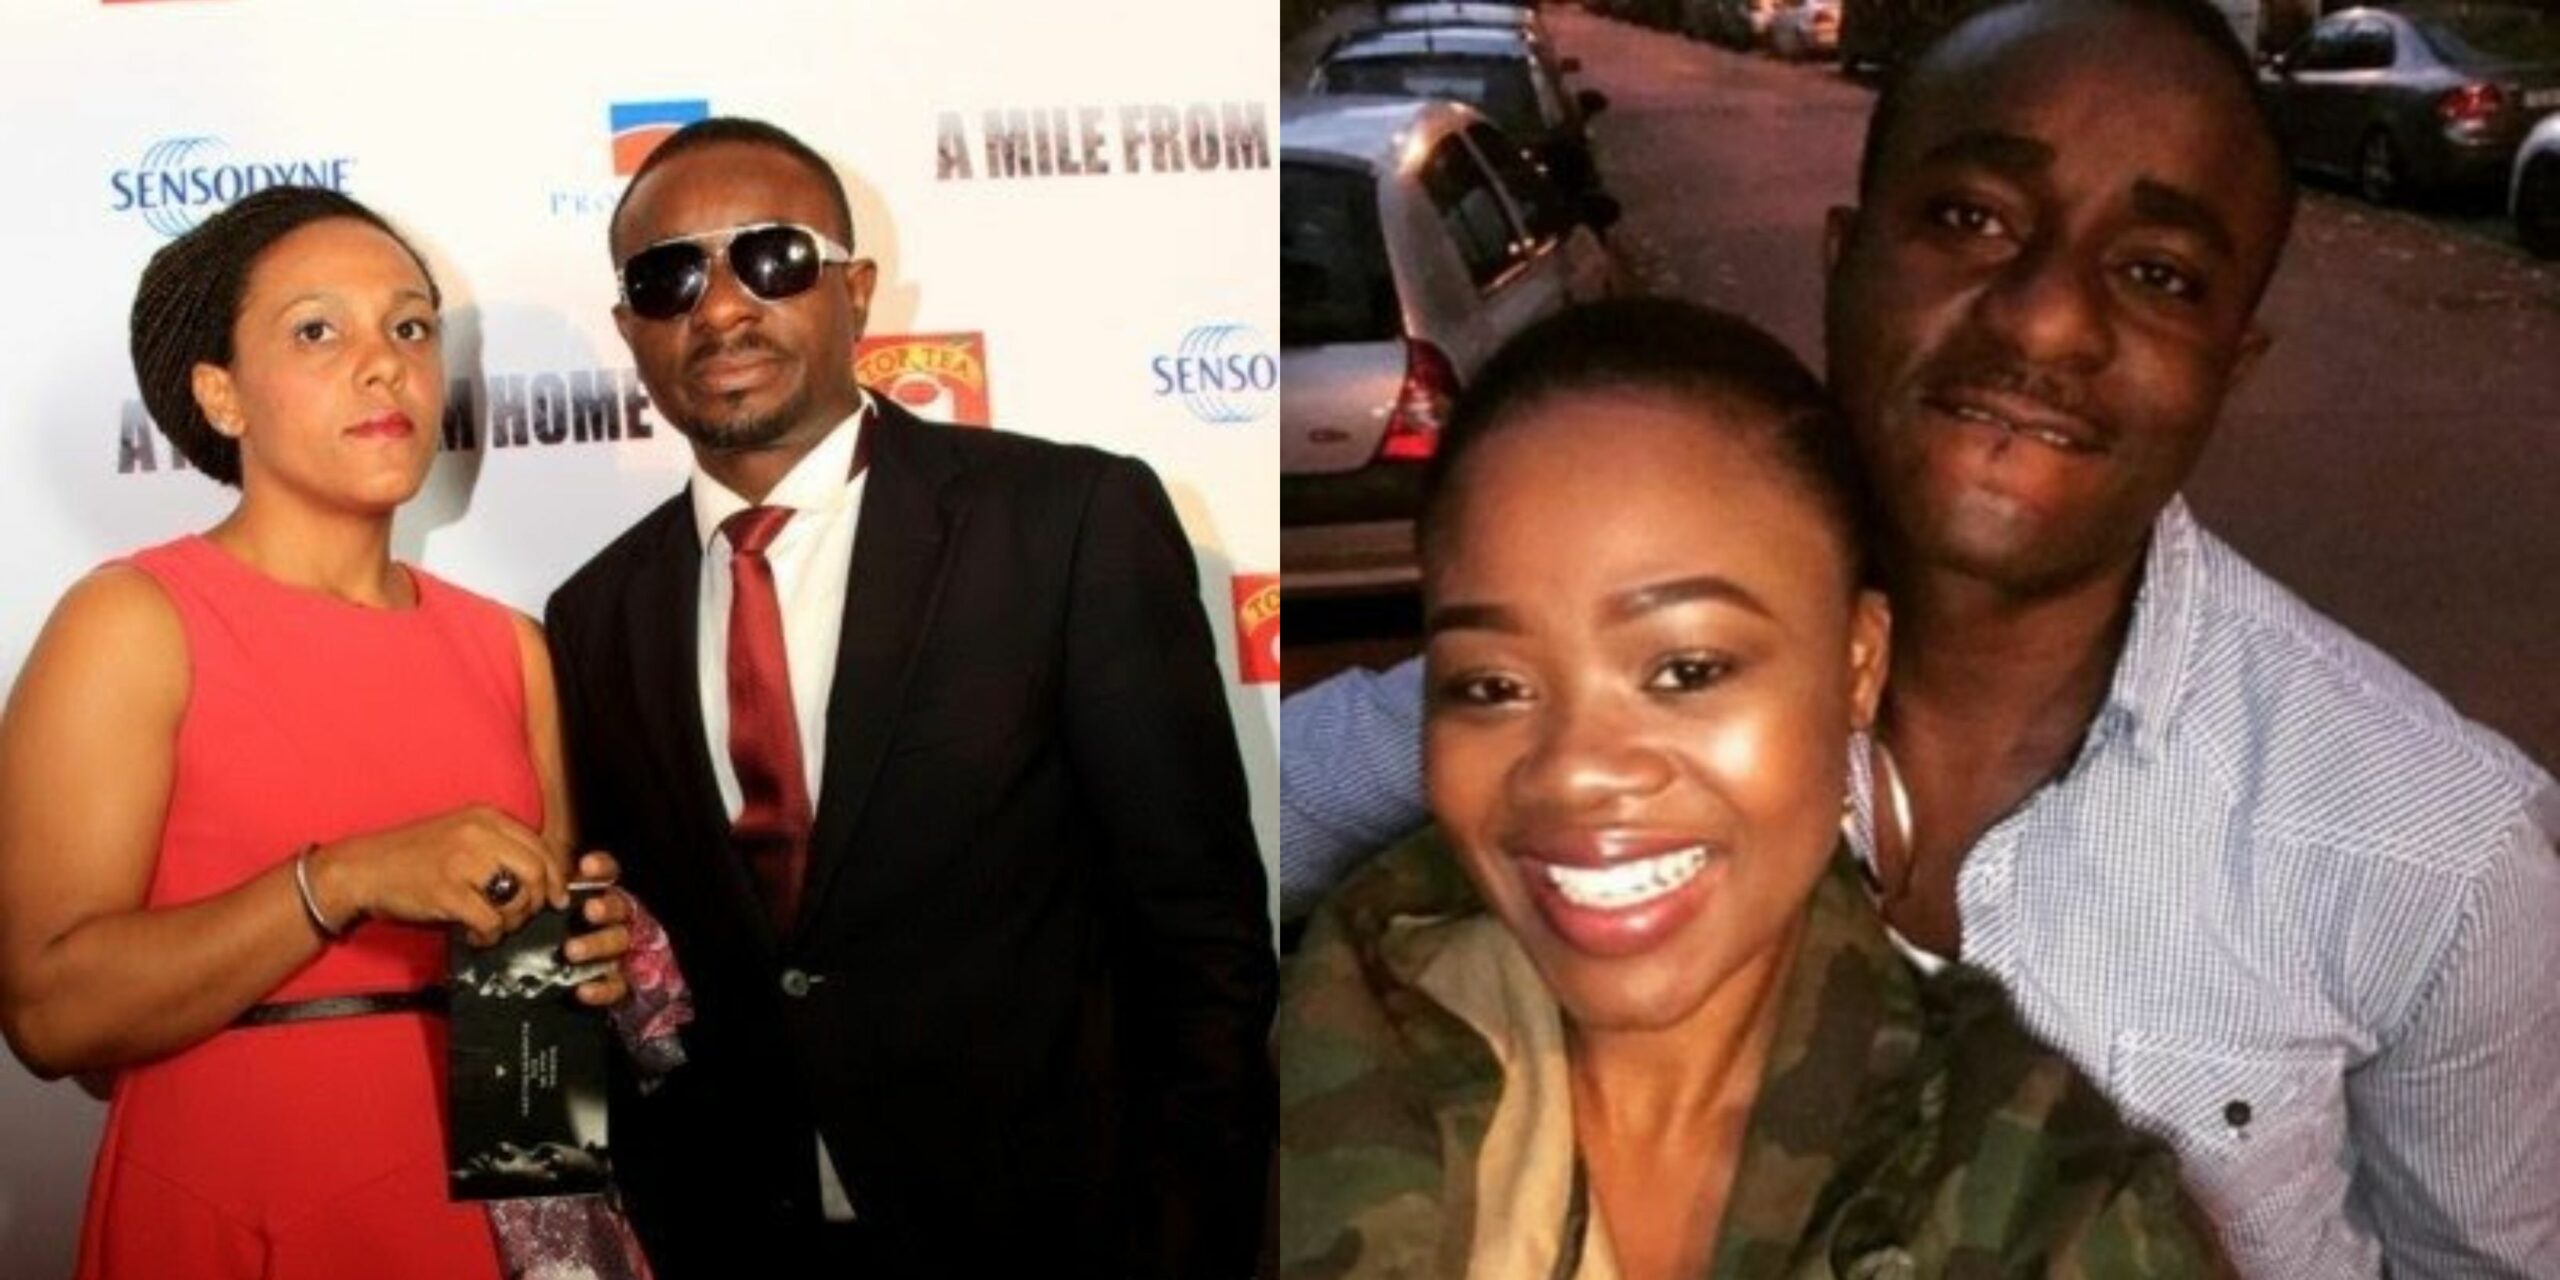 Emeka Ike fires back at follower who said his ex-wife ‘Fits him more’ than his new wife